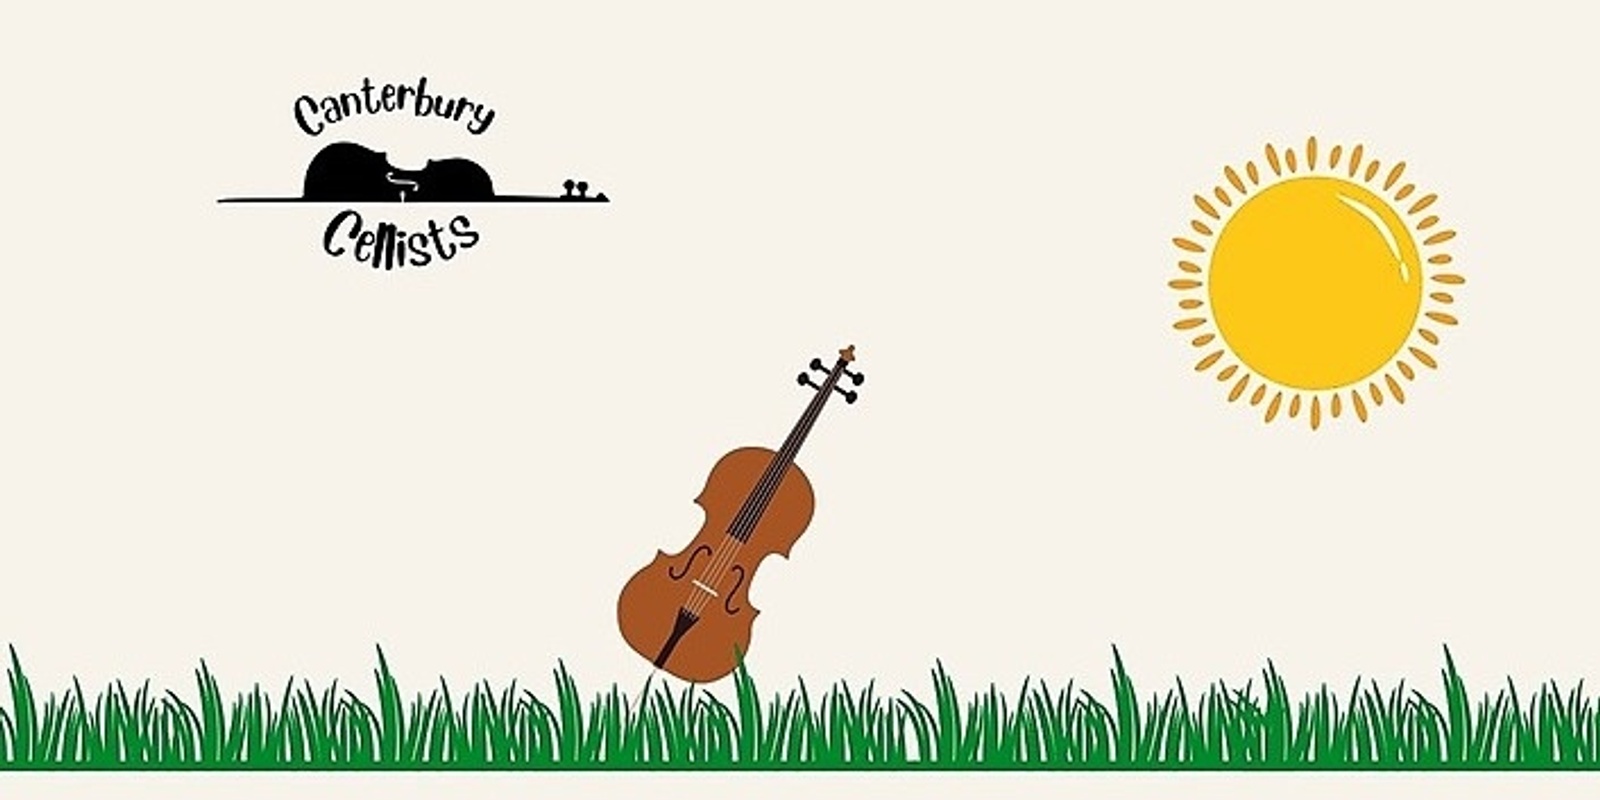 Banner image for Canterbury Cellists on the Lawn @ Lincoln Public Library